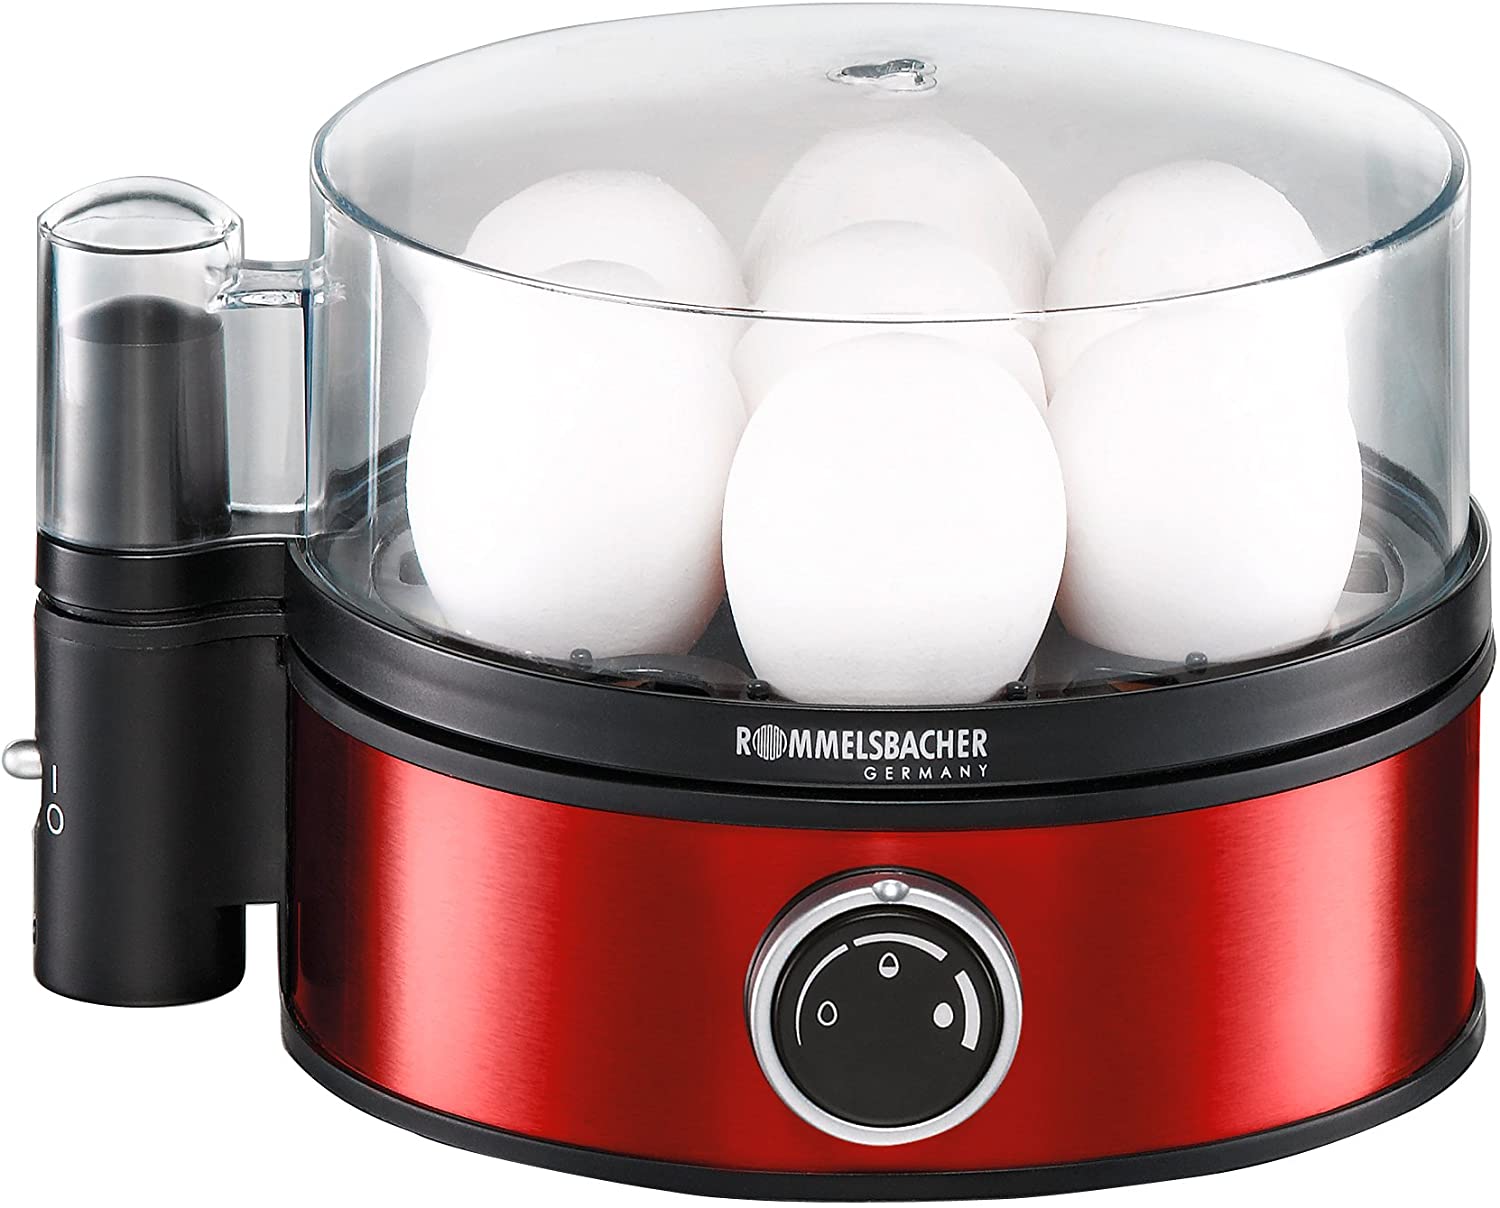 ROMMELSBACHER Egg Cooker ER 405/R - for 1-7 Eggs, Adjustable Hardness, Electronic Cooking Time Monitoring, On/Off Switch, Beep at Cooking Time, Stainless Steel Case, 400 Watt, Metallic Red